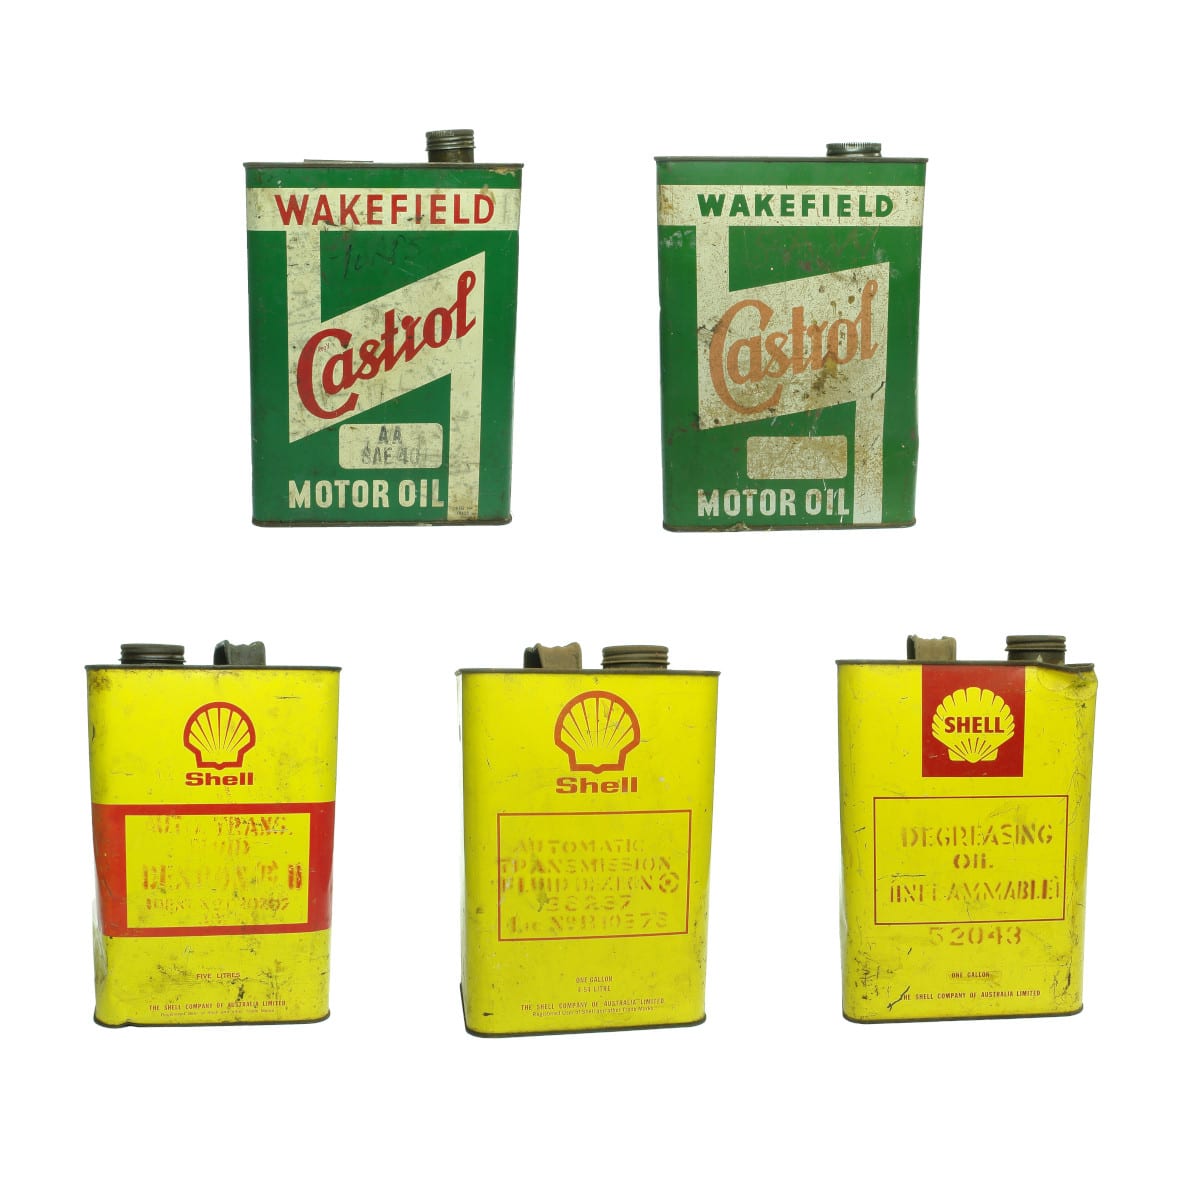 5 Oil Tins. 2 x Wakefield Castrol and 3 x Shell. (Not for post messy contents in some of these).